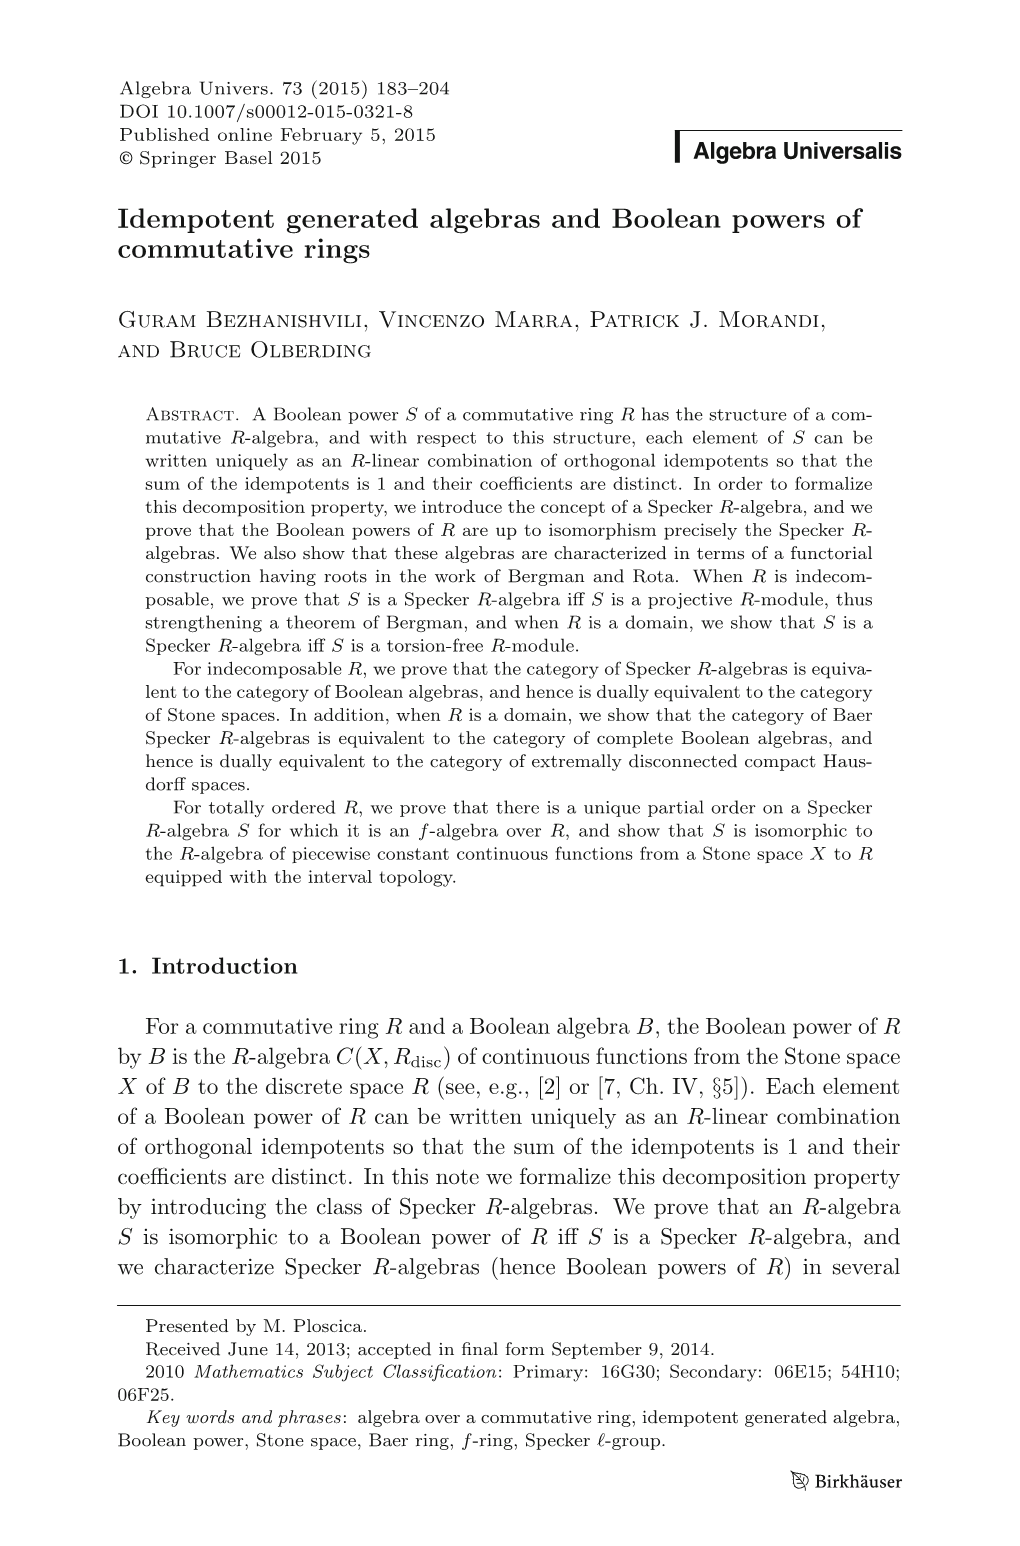 Idempotent Generated Algebras and Boolean Powers of Commutative Rings